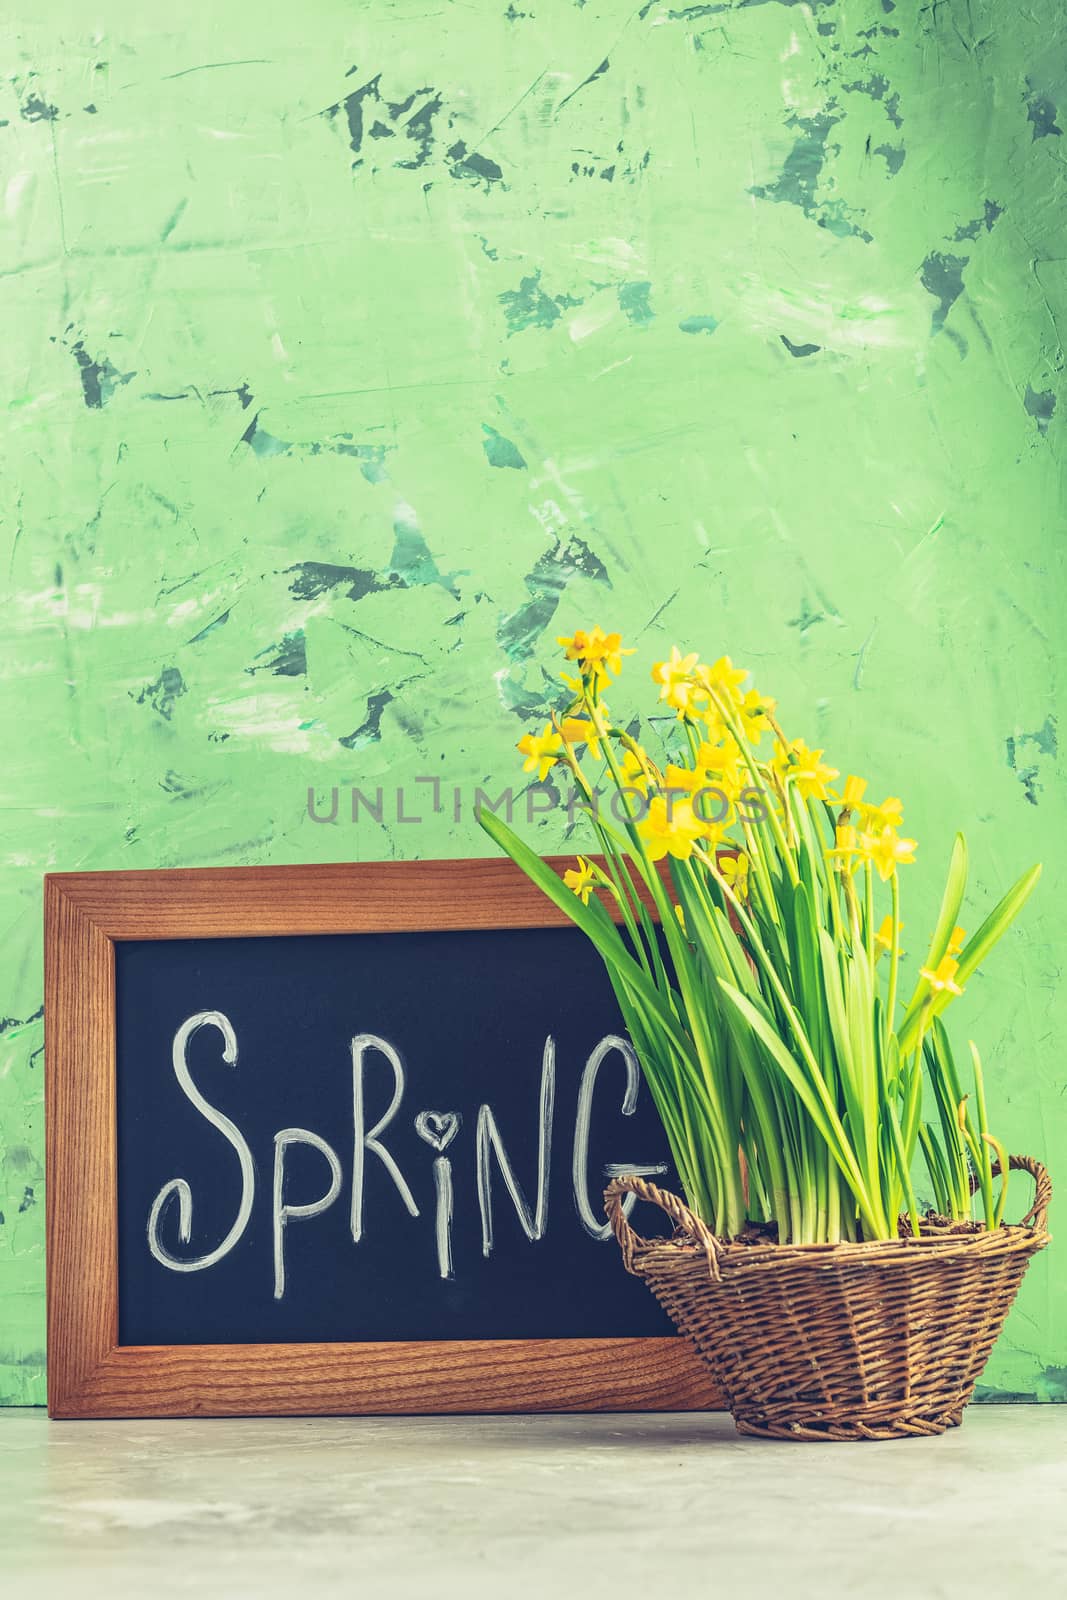 Calligraphic inscription hand lettering letters spring on black chalkboard standing on gray concrete table surface with yellow blossom narcissus in wicker basket. Spring coming concept background.